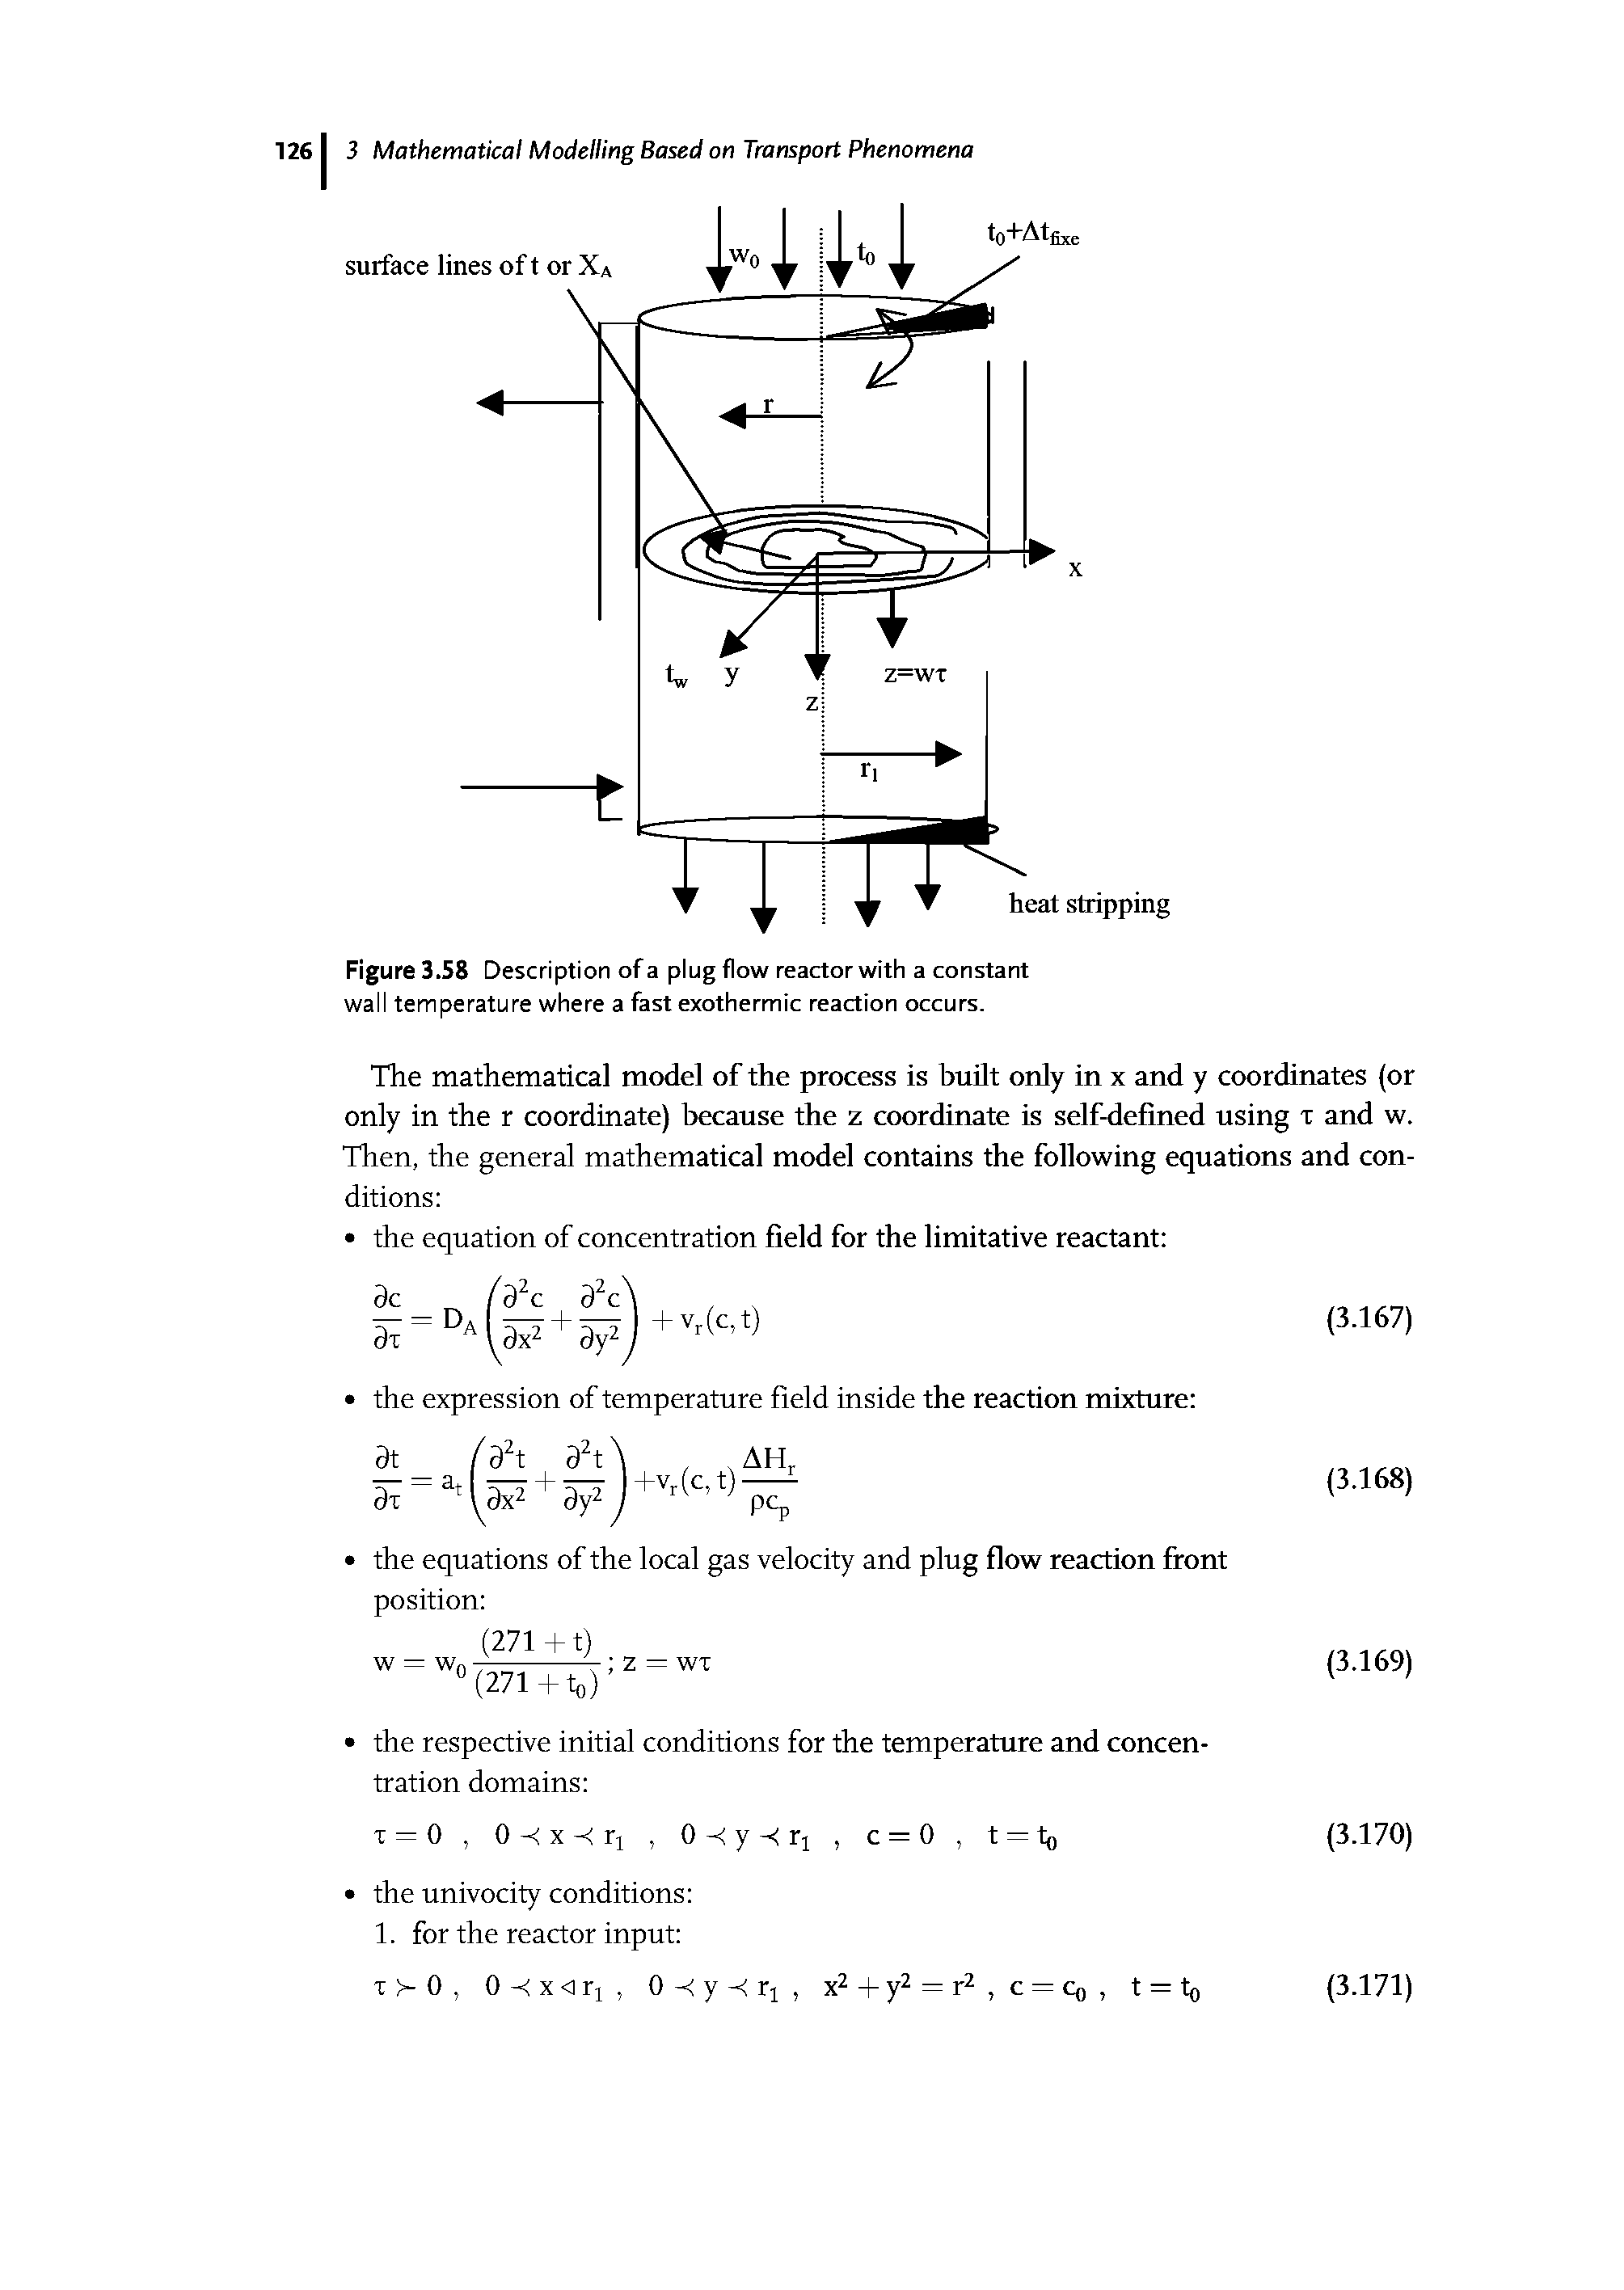 Figure 3.58 Description of a plug flow reactor with a constant wall temperature where a fast exothermic reaction occurs.